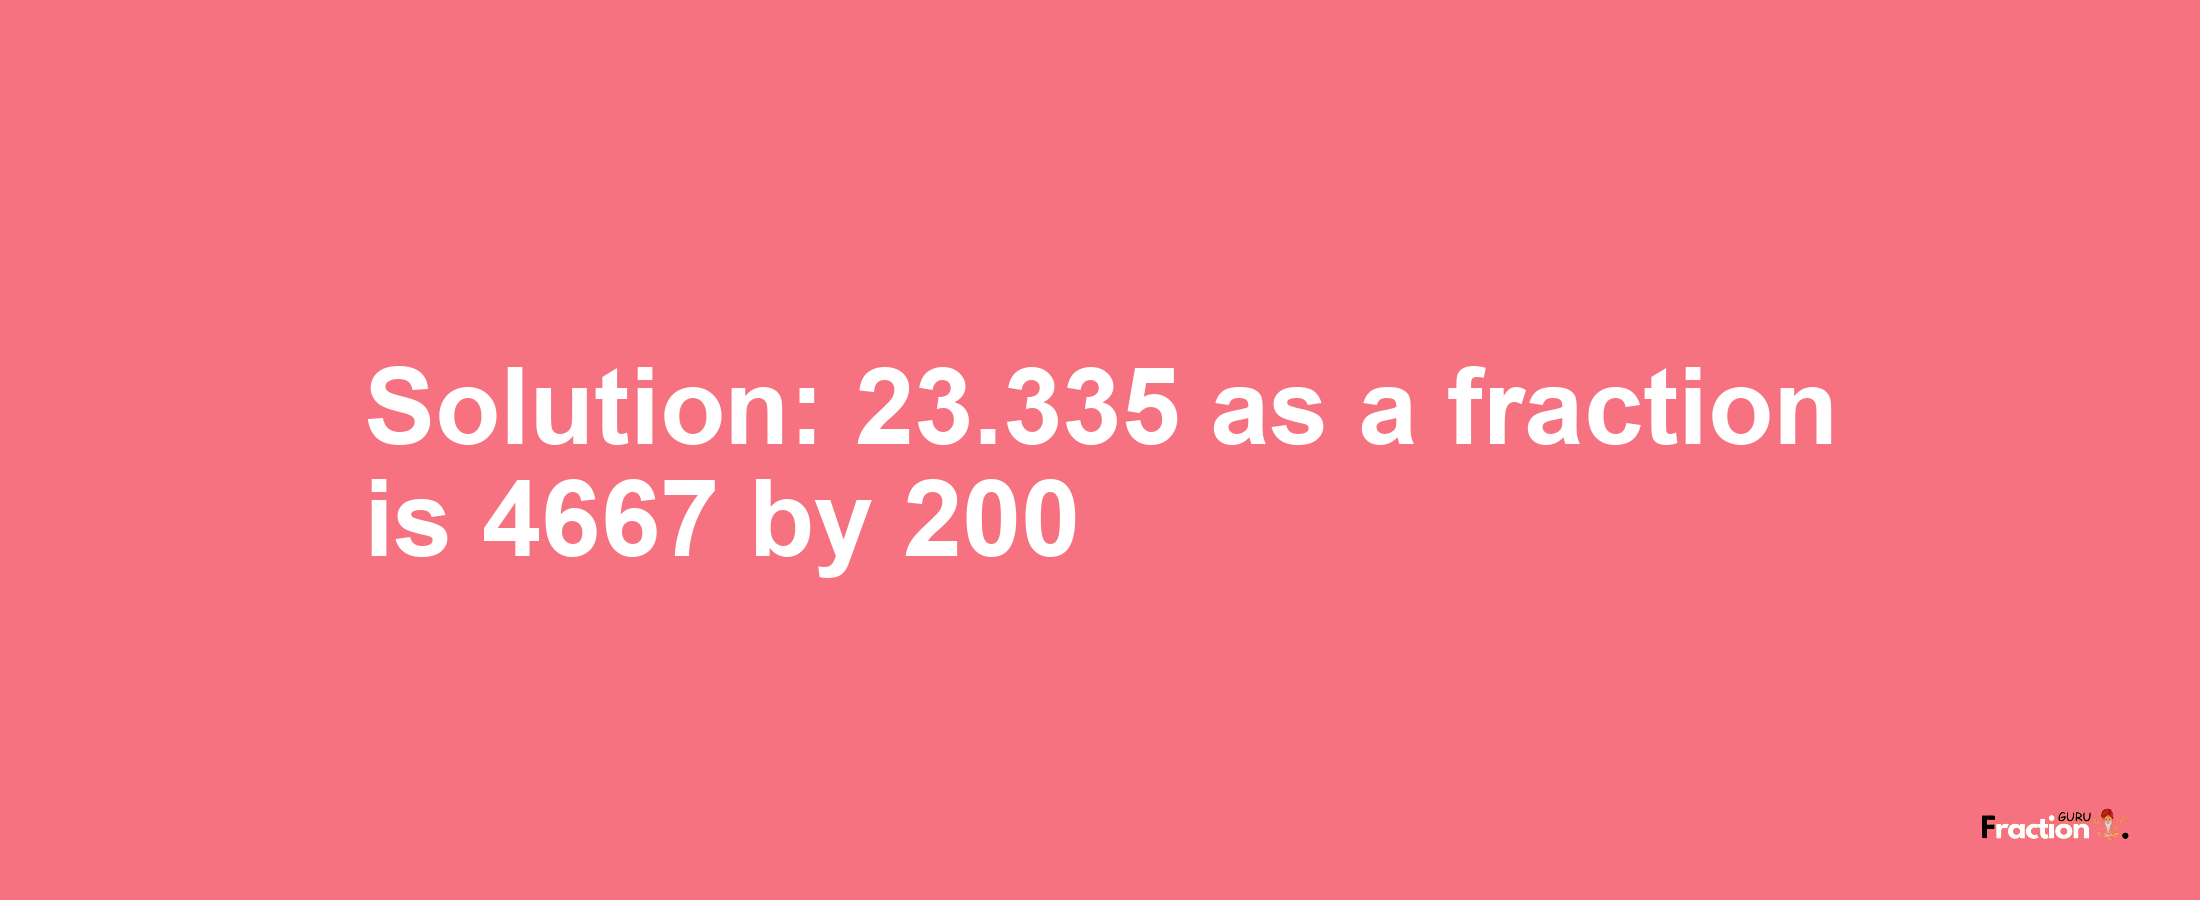 Solution:23.335 as a fraction is 4667/200